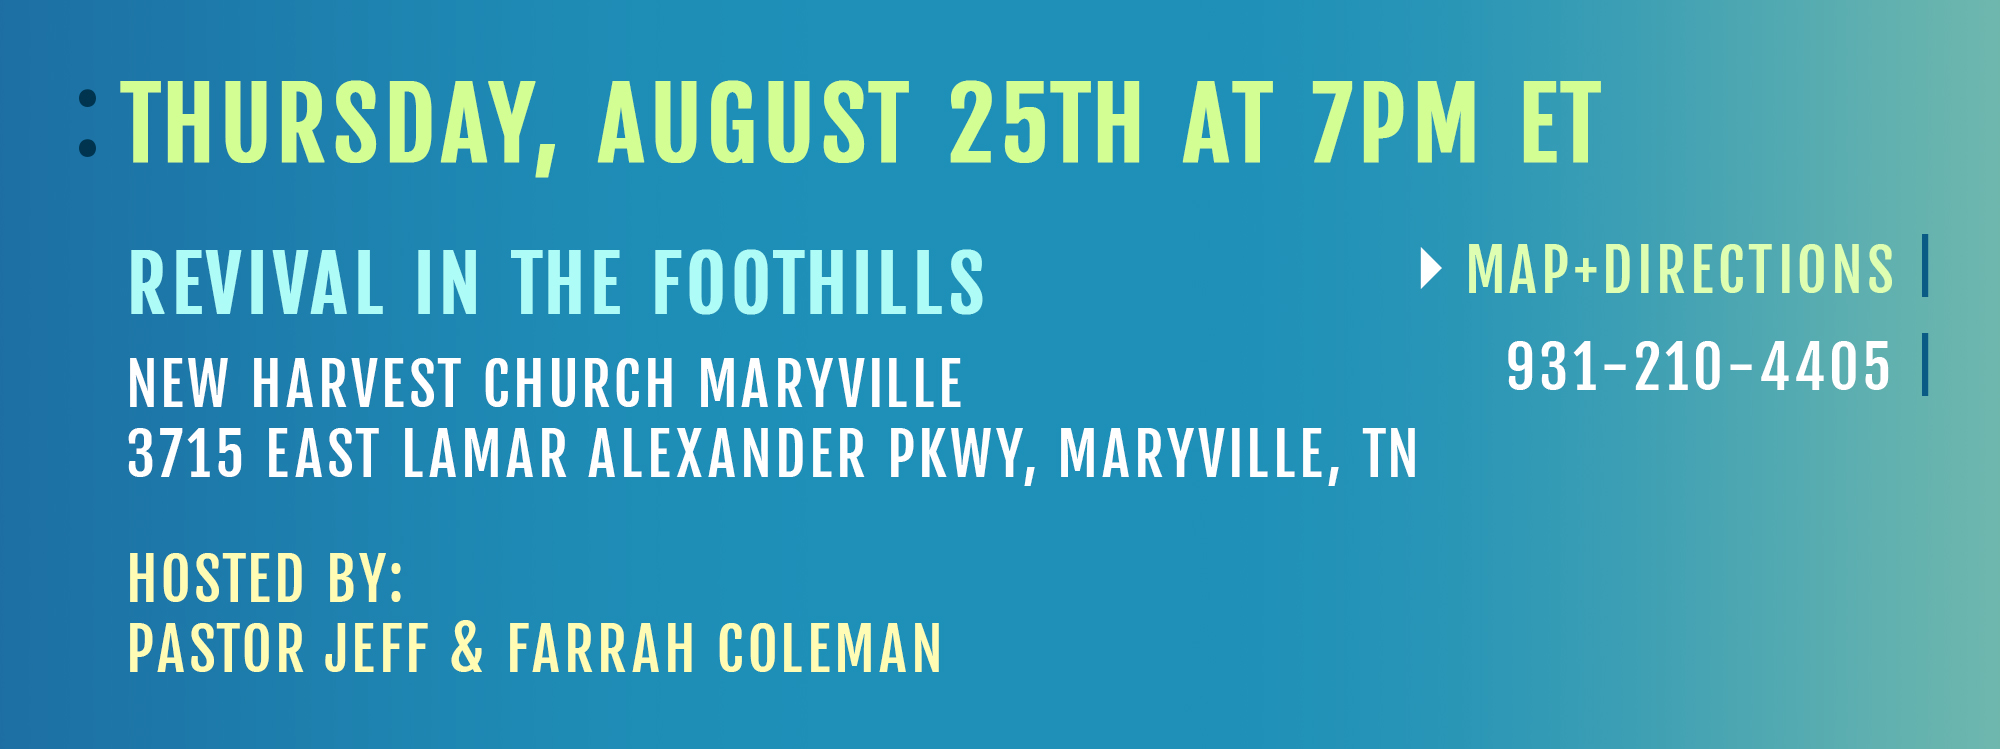 Thursday, August 25th at 7:00 pm ET Revival in the Foothills New Harvest Church Maryville 3715 East Lamar Alexander Parkway Maryville, TN Map + Directions 931-210-4405